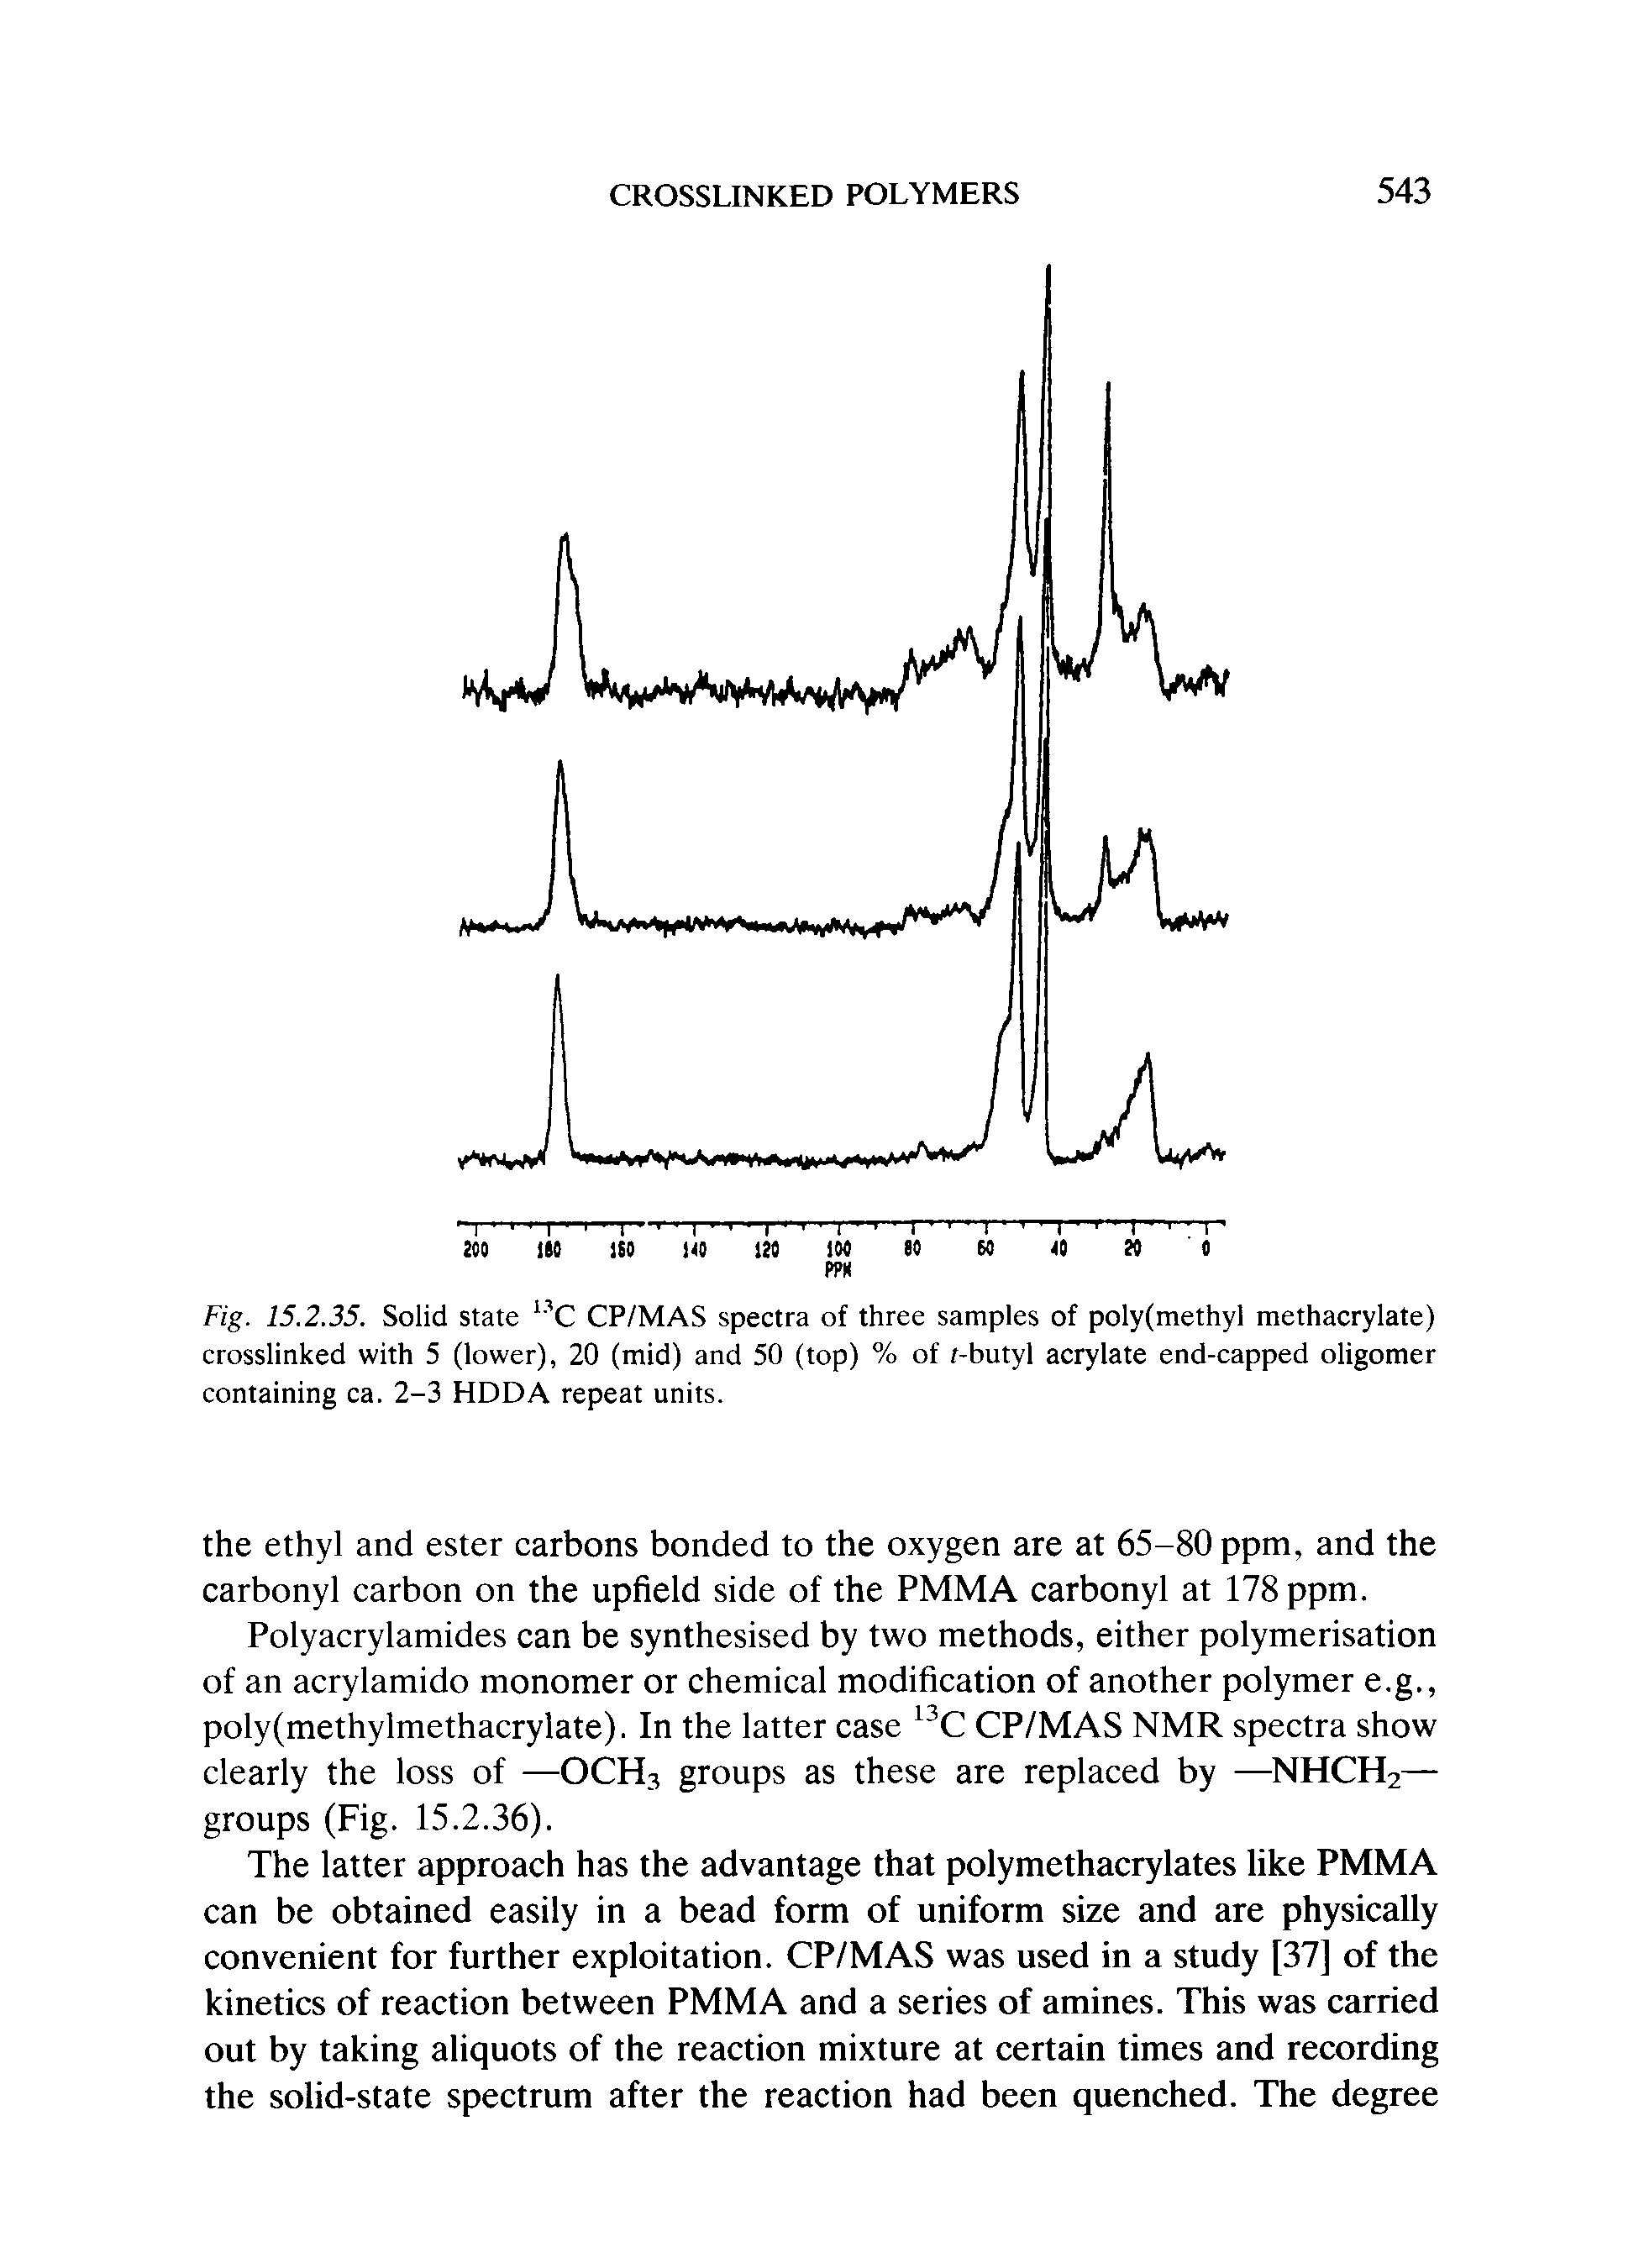 Fig. 15.2.35. Solid state C CP/MAS spectra of three samples of poly(methyl methacrylate) crosslinked with 5 (lower), 20 (mid) and 50 (top) % of f-butyl acrylate end-capped oligomer containing ca. 2-3 HDDA repeat units.